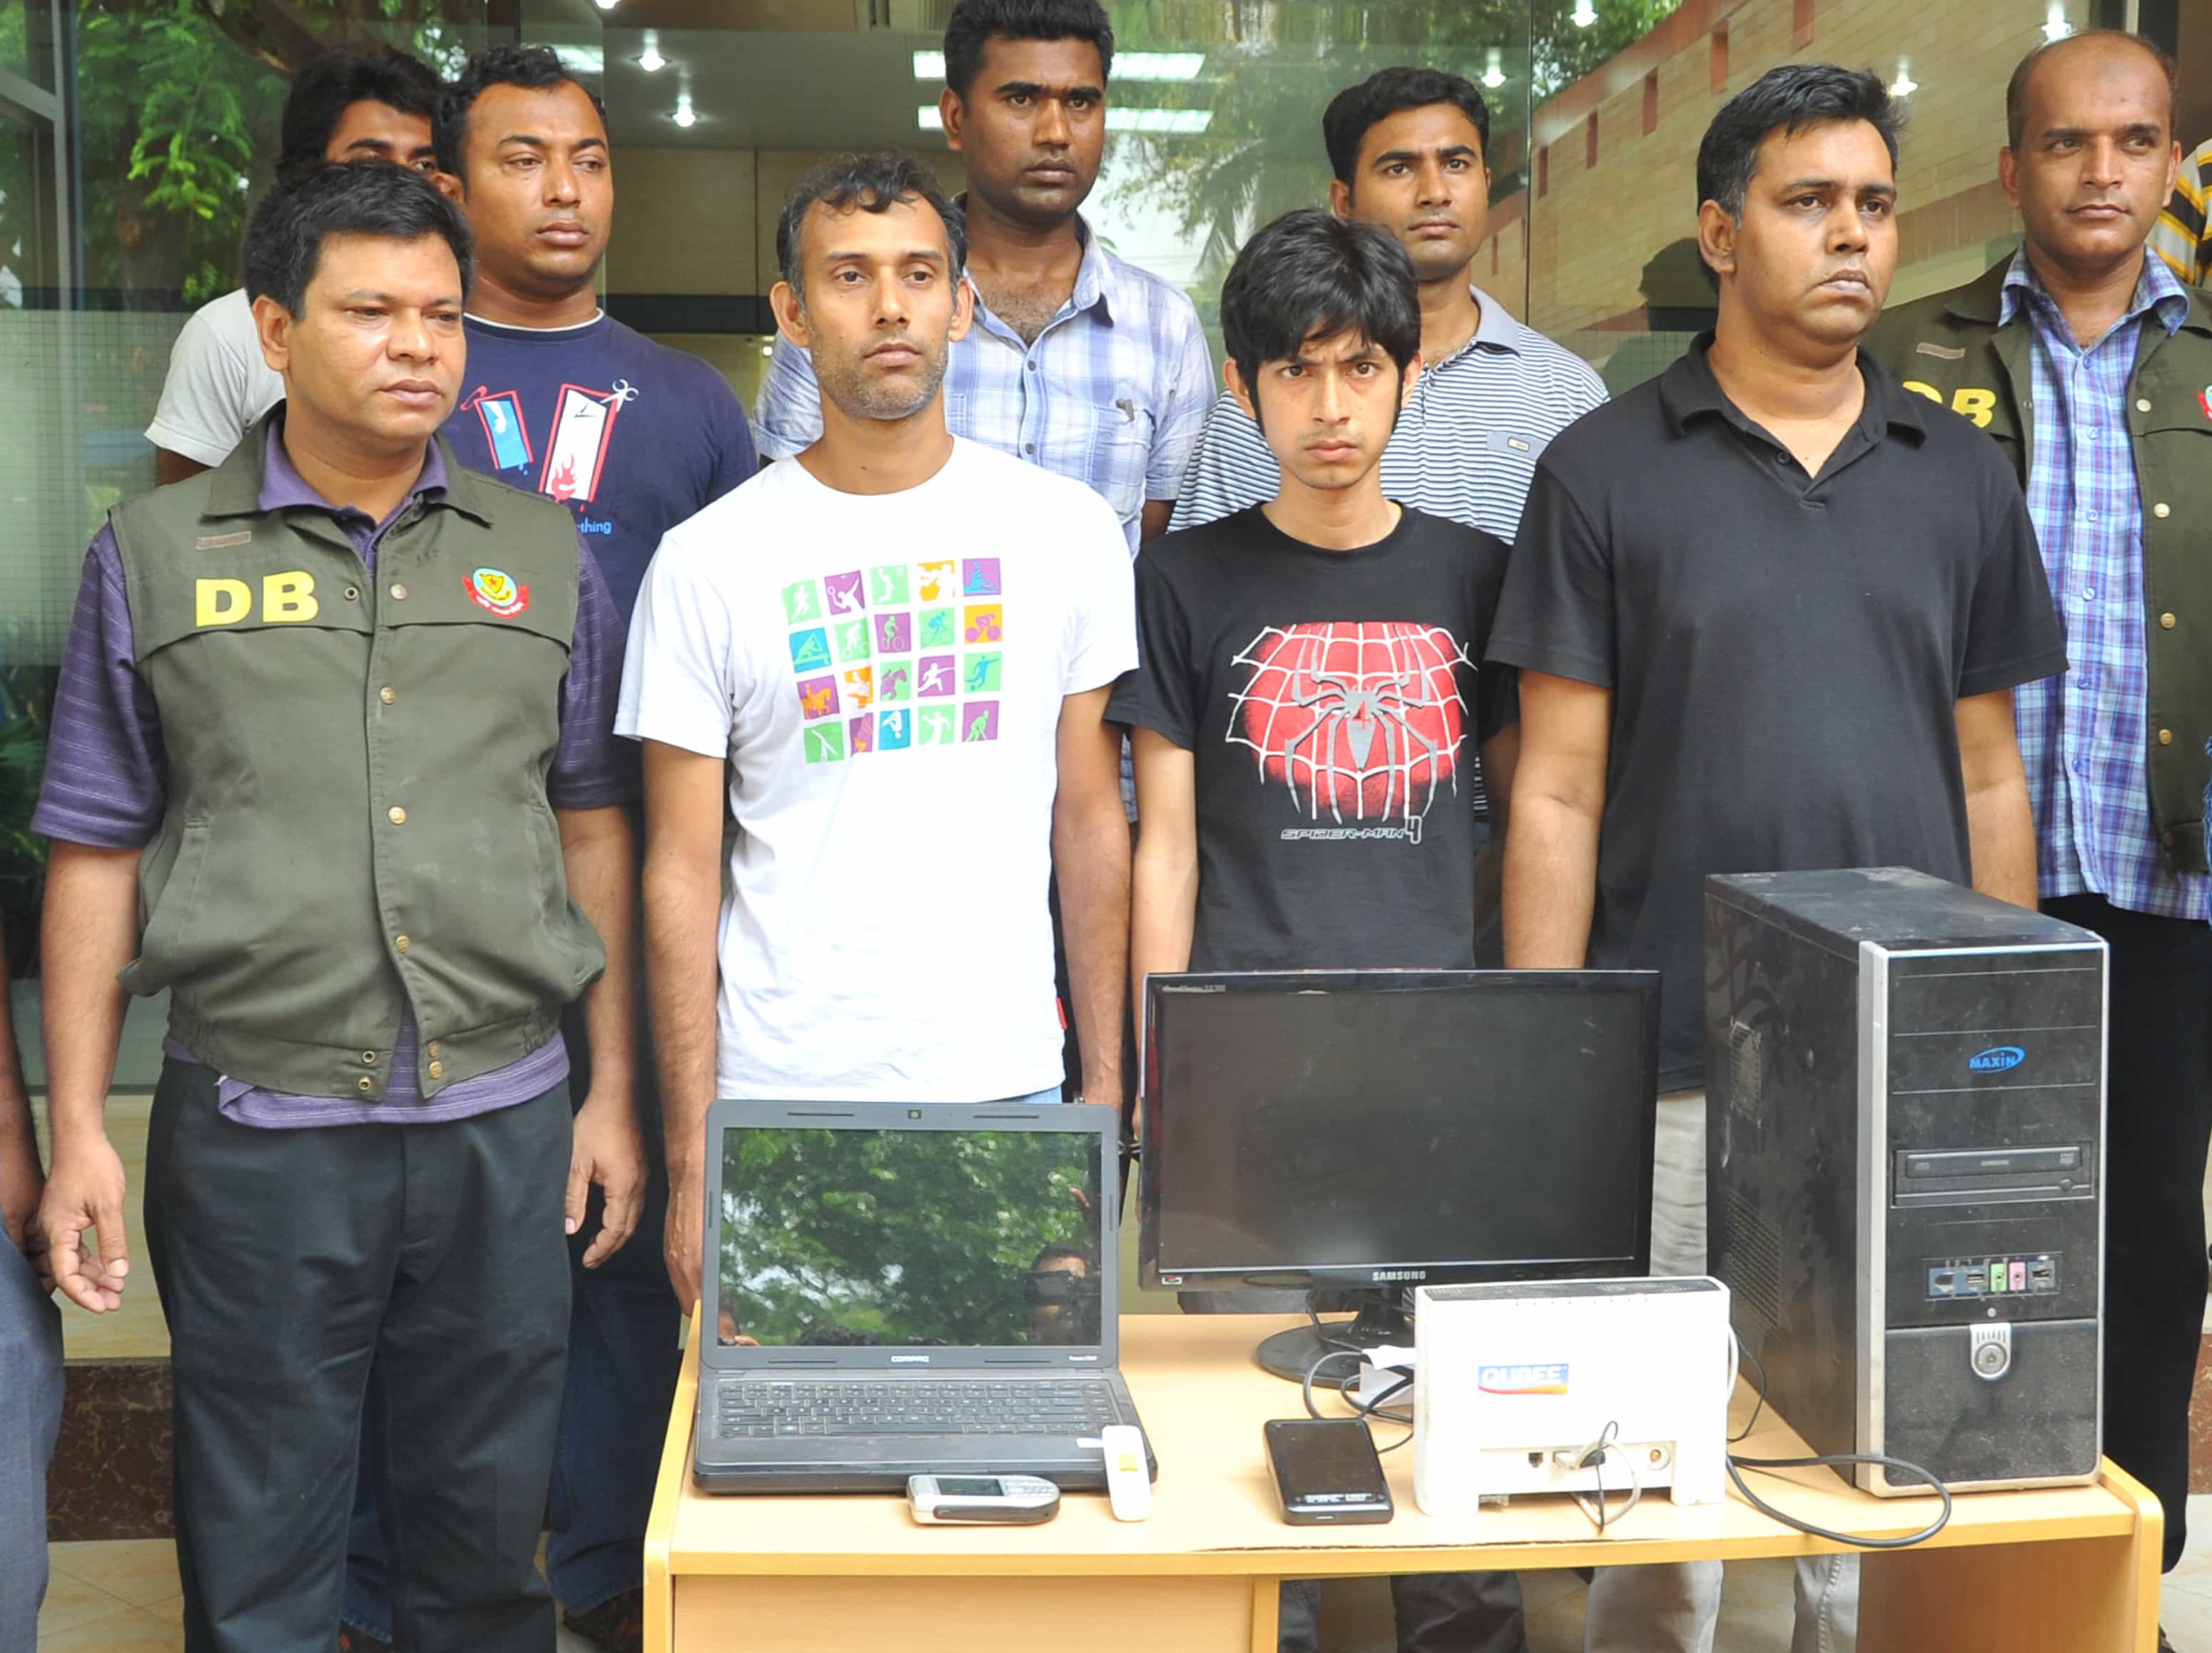 Police arrested bloggers Moshiur Rahman Biblop, Rasel Parvez, and Subrata Shuvo, in connection with their alleged anti-Islamic blogging online, Demotix/Rehman Asad